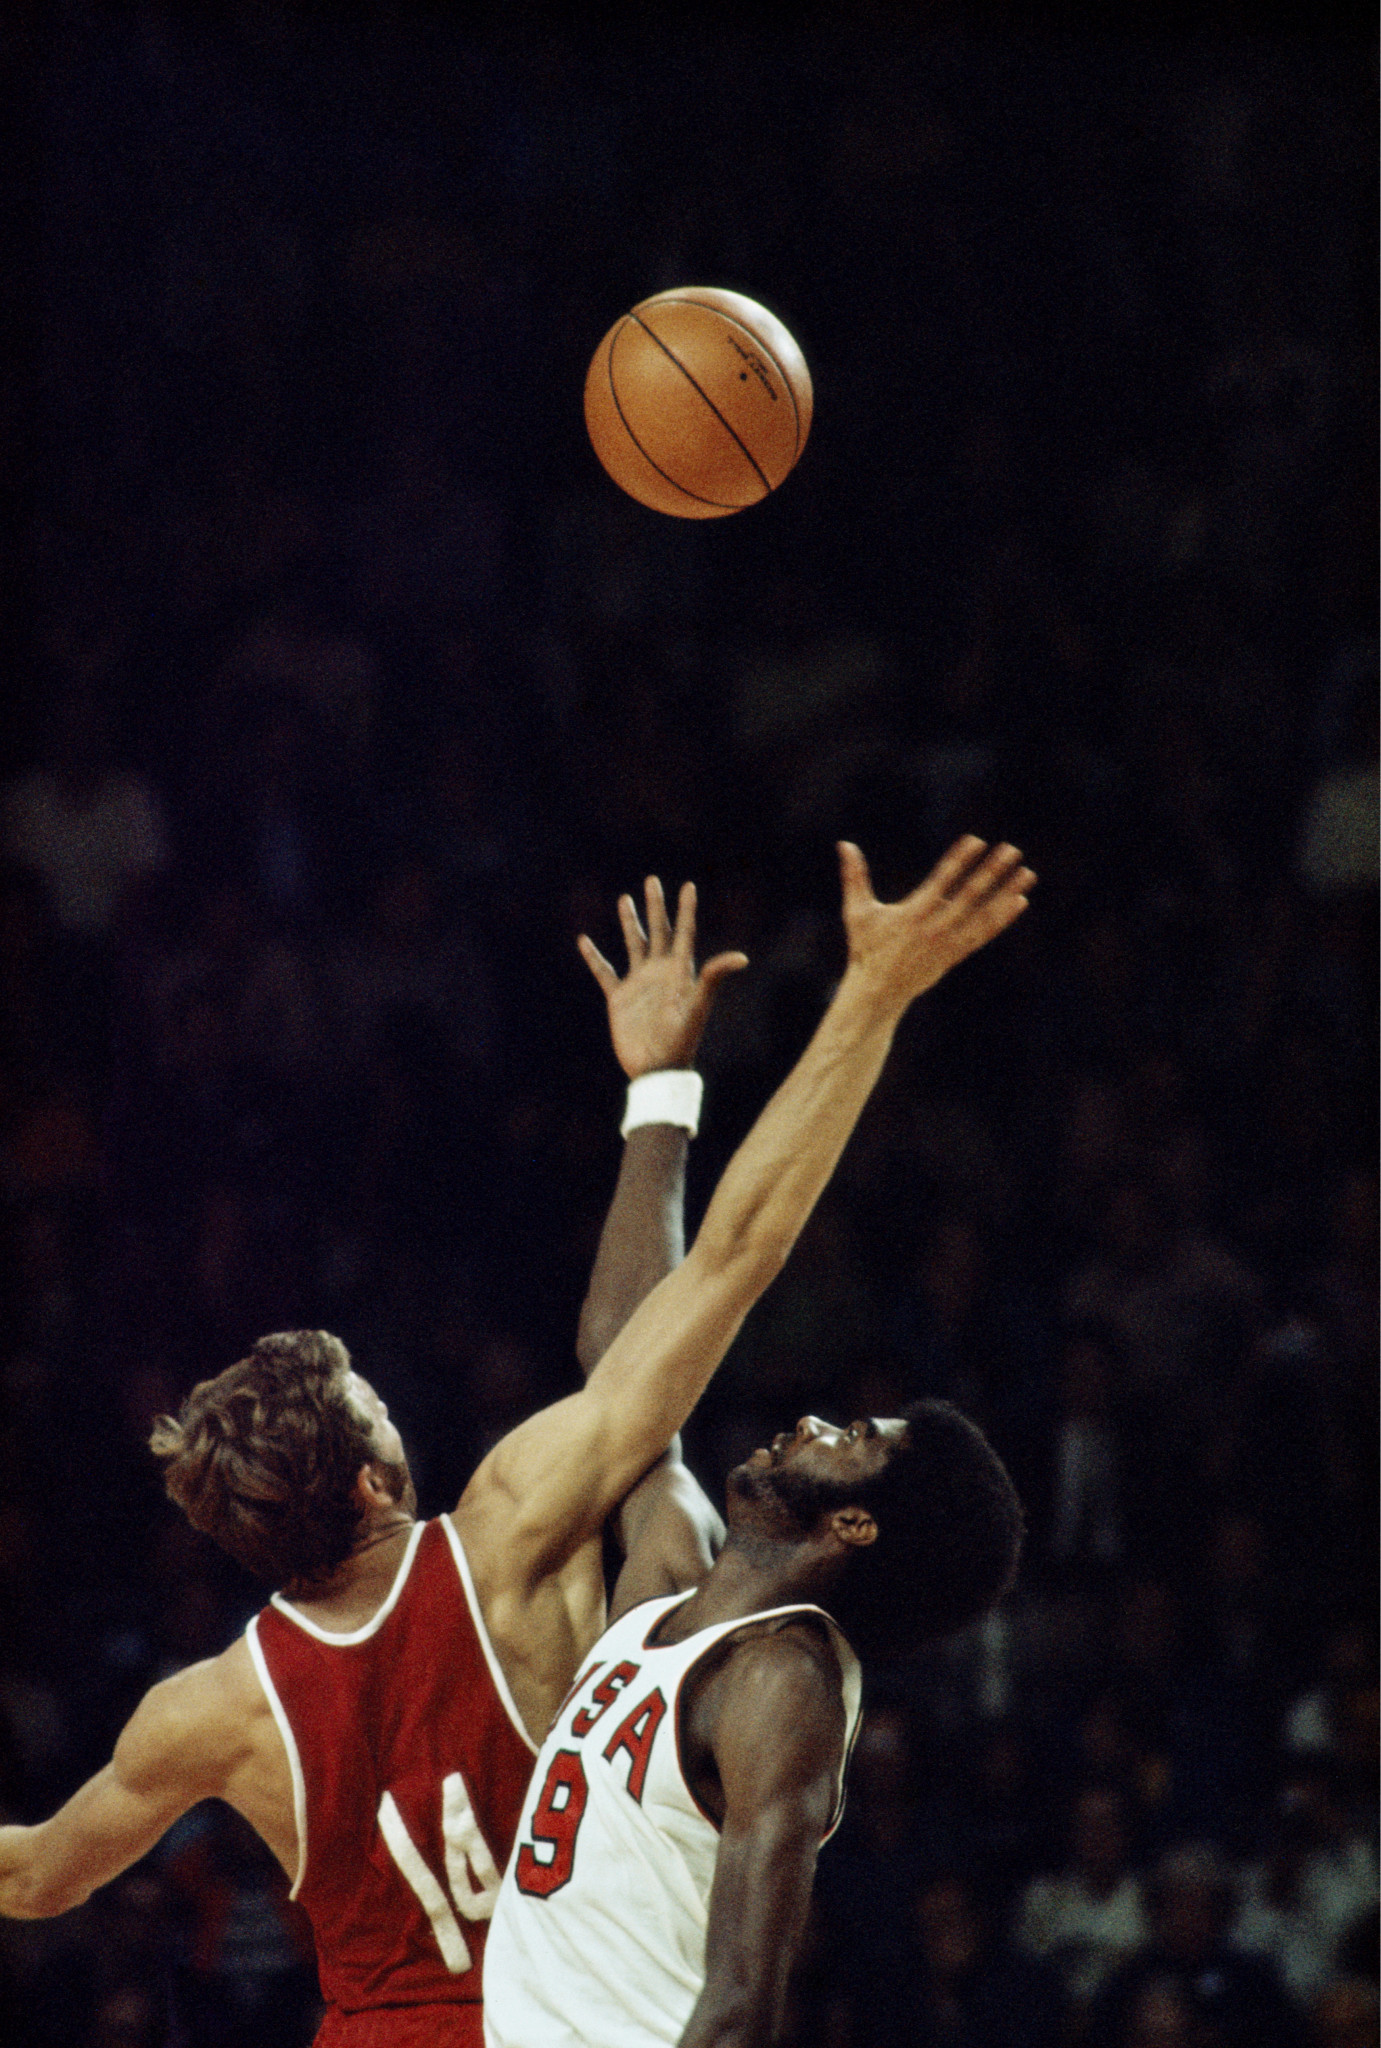 The 1972 Olympic basketball final proved the most controversial match in the sport's history  ©Getty Images